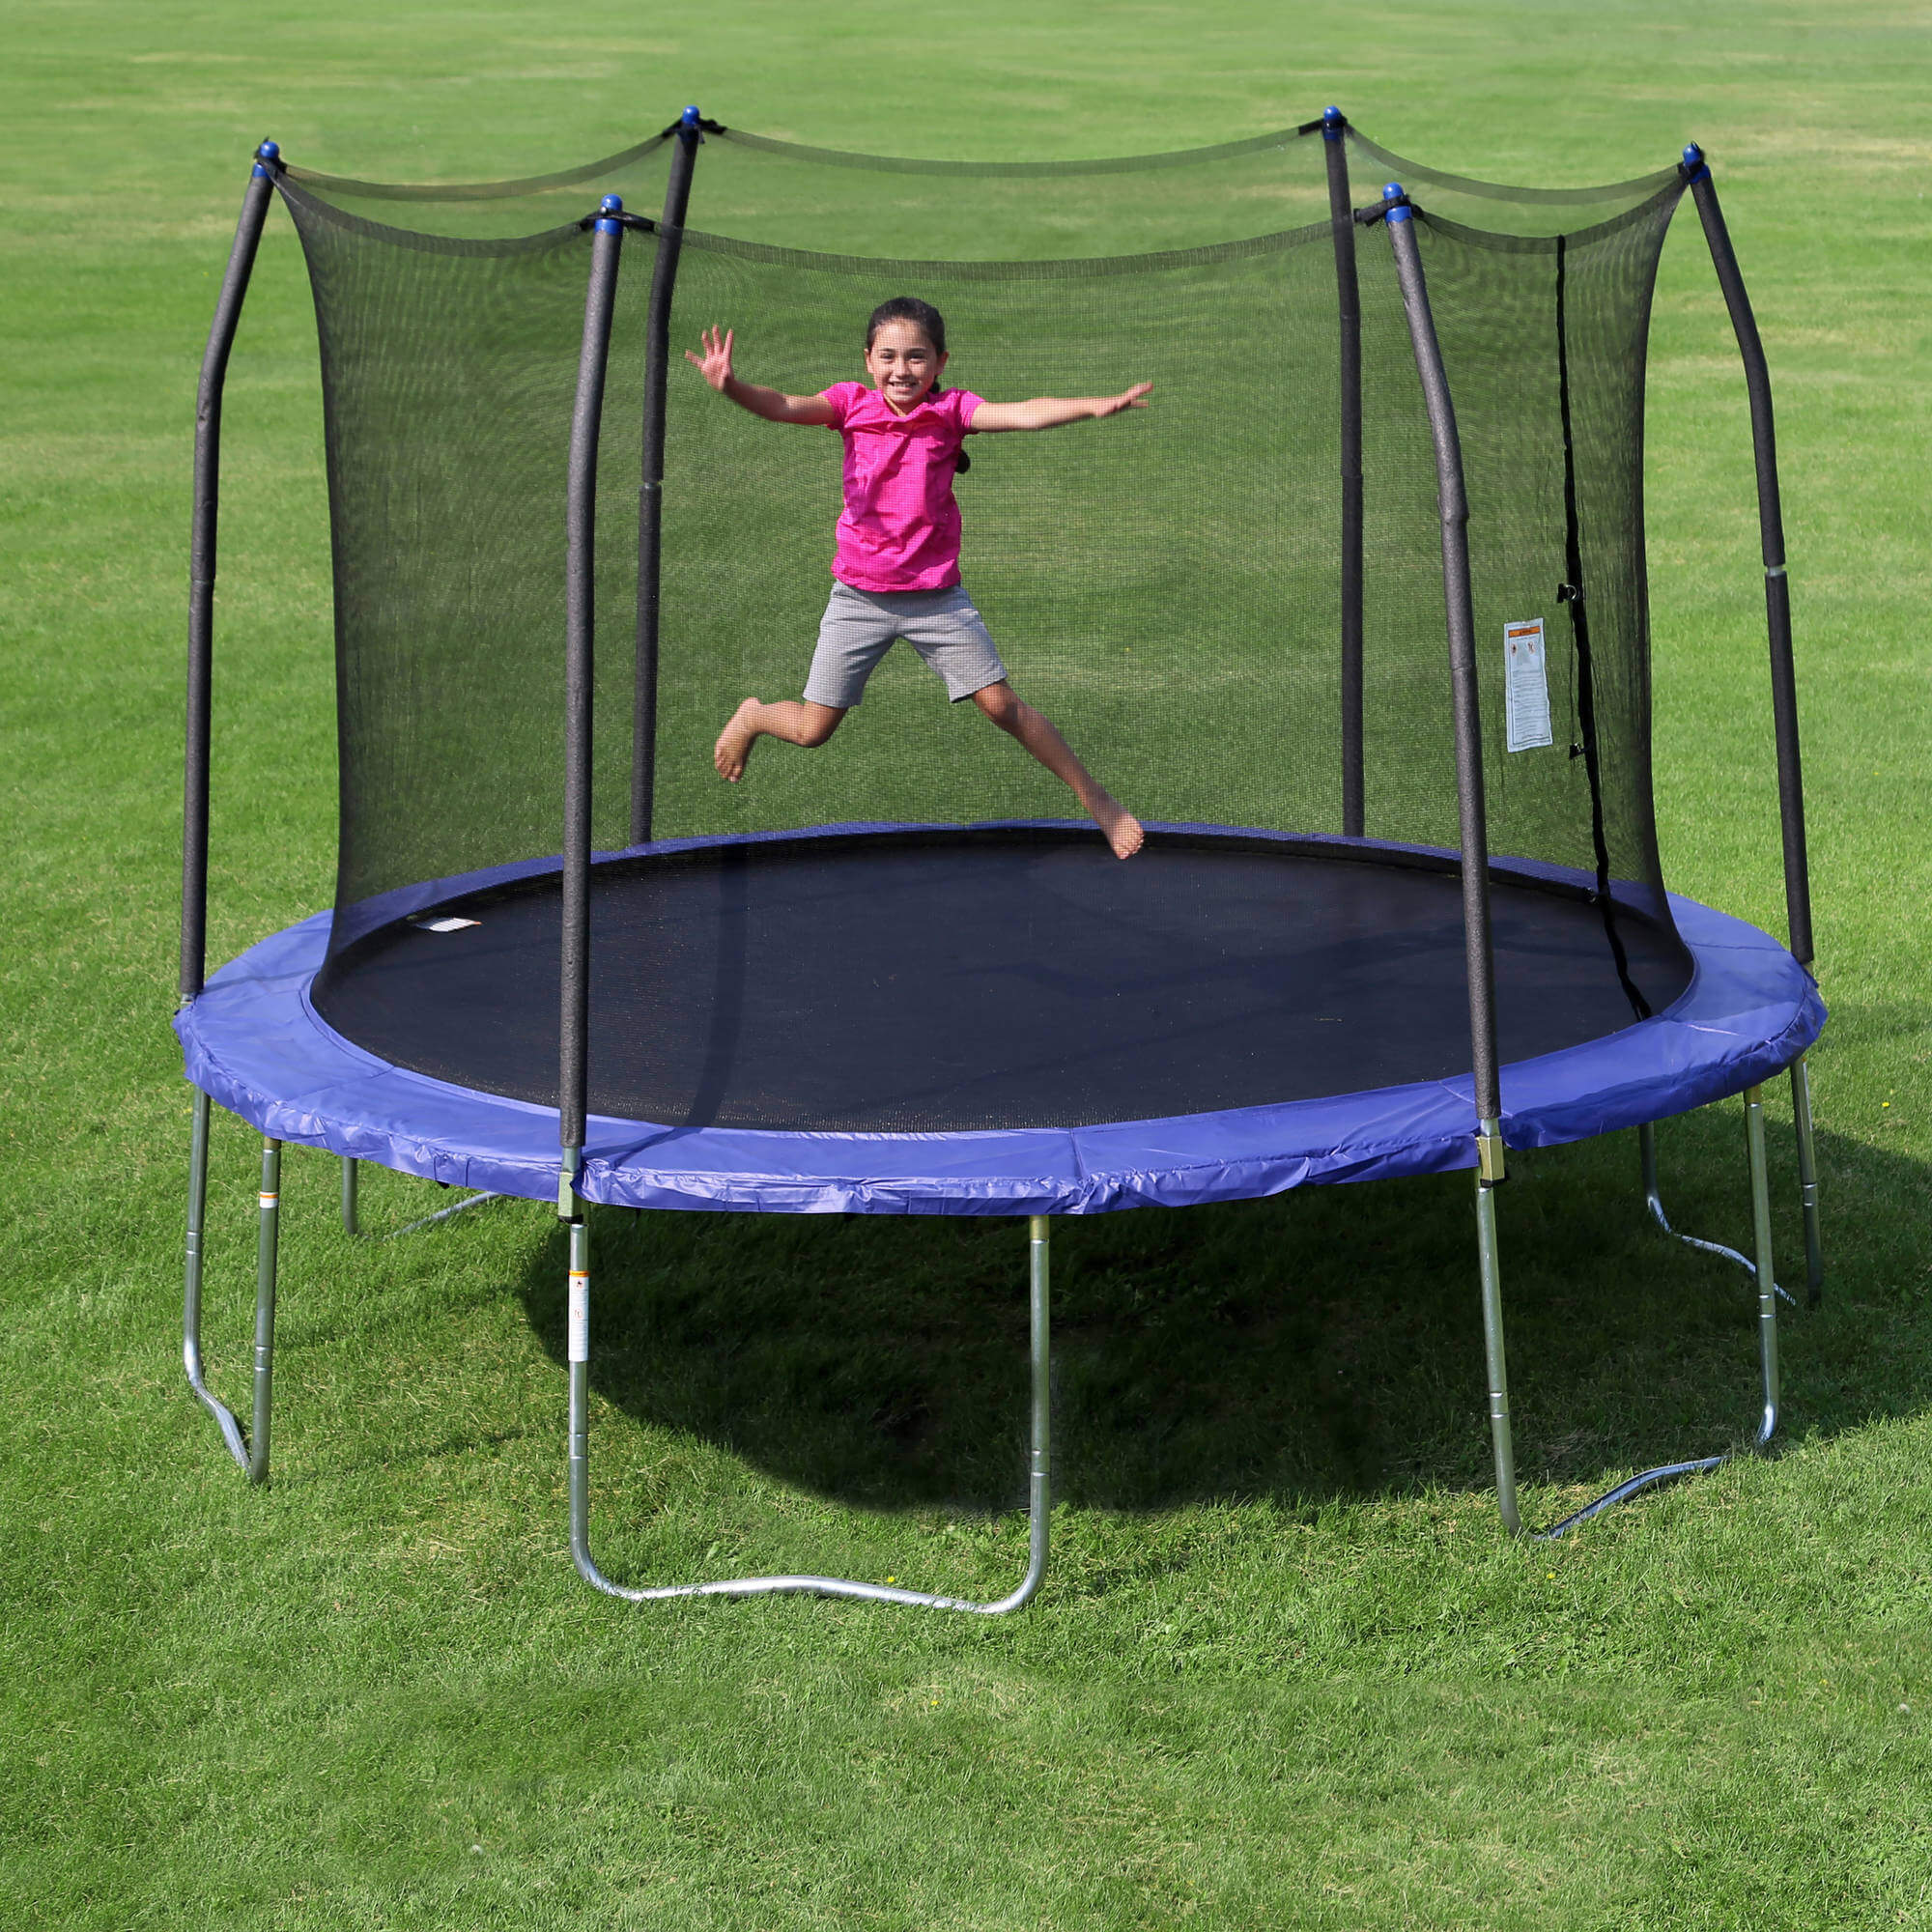 Best Trampolines for 2020